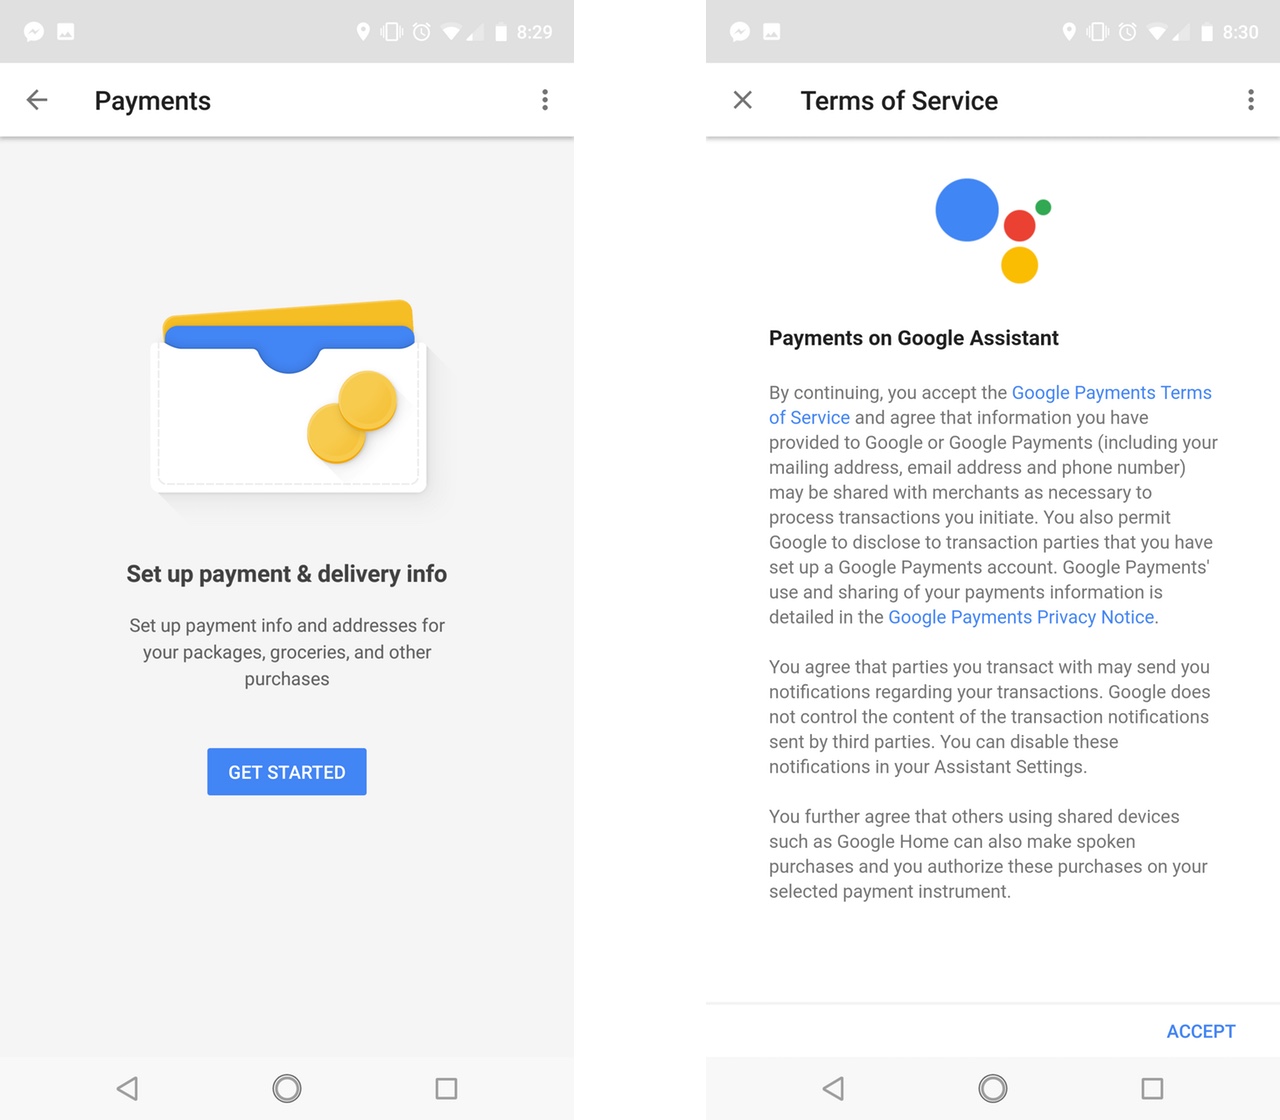 Adding a Payments option to Google Assistant